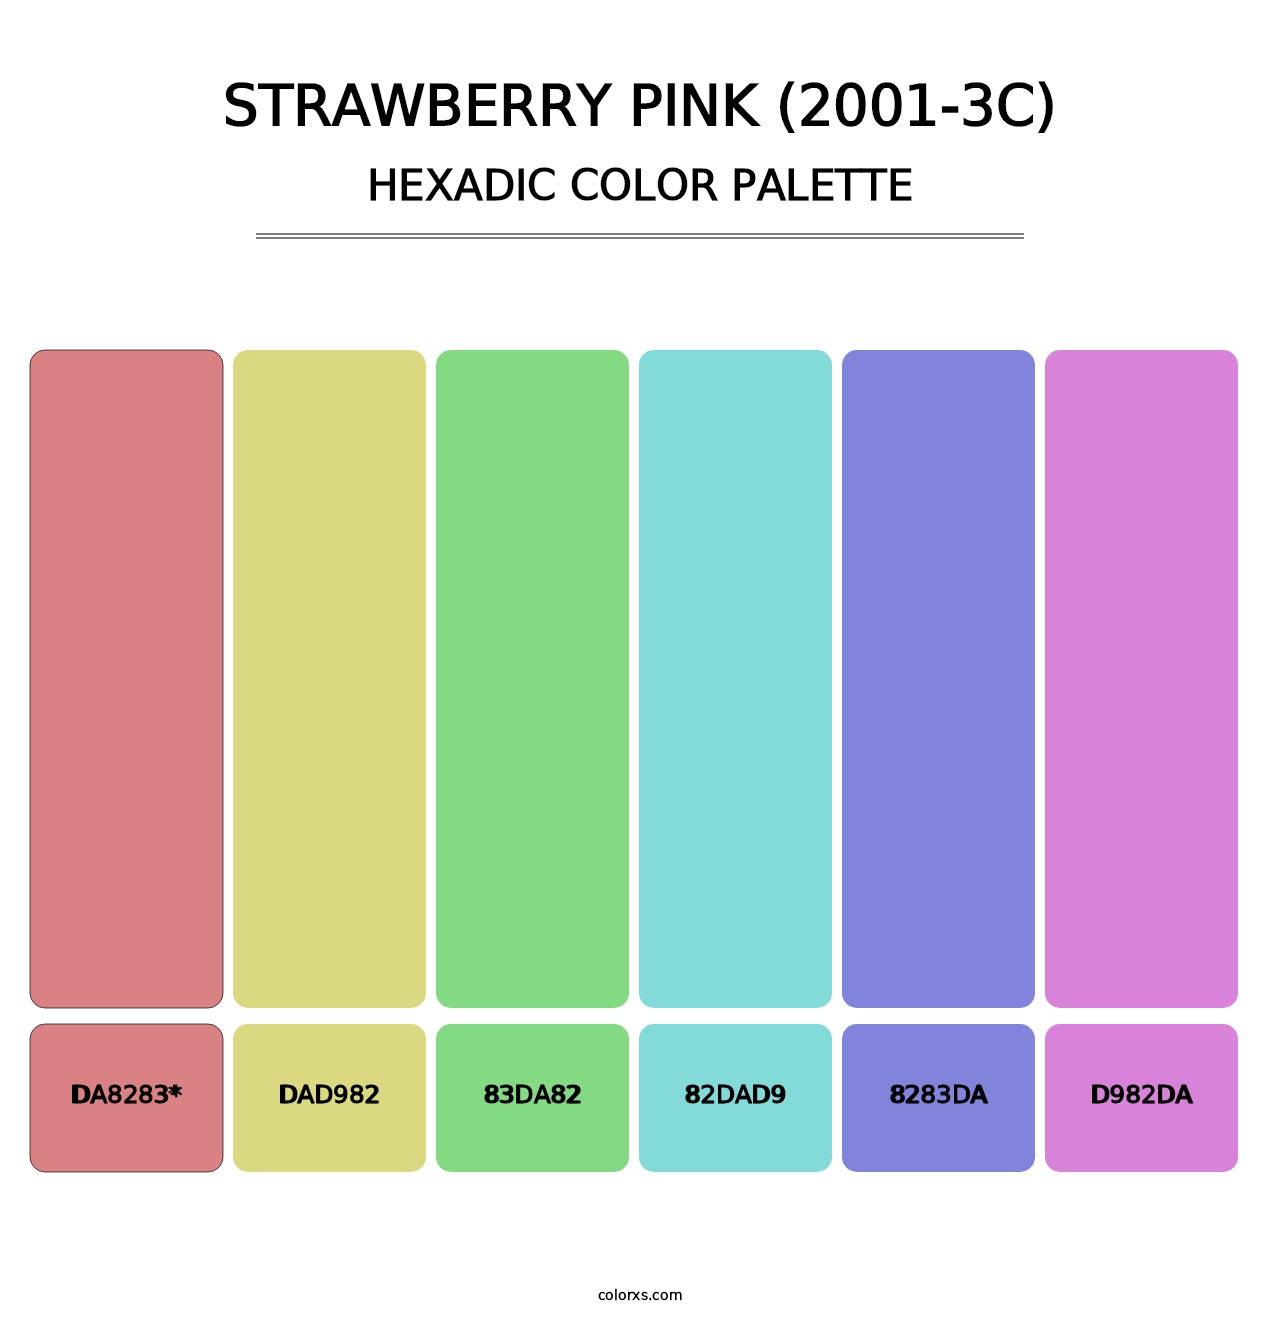 Strawberry Pink (2001-3C) - Hexadic Color Palette